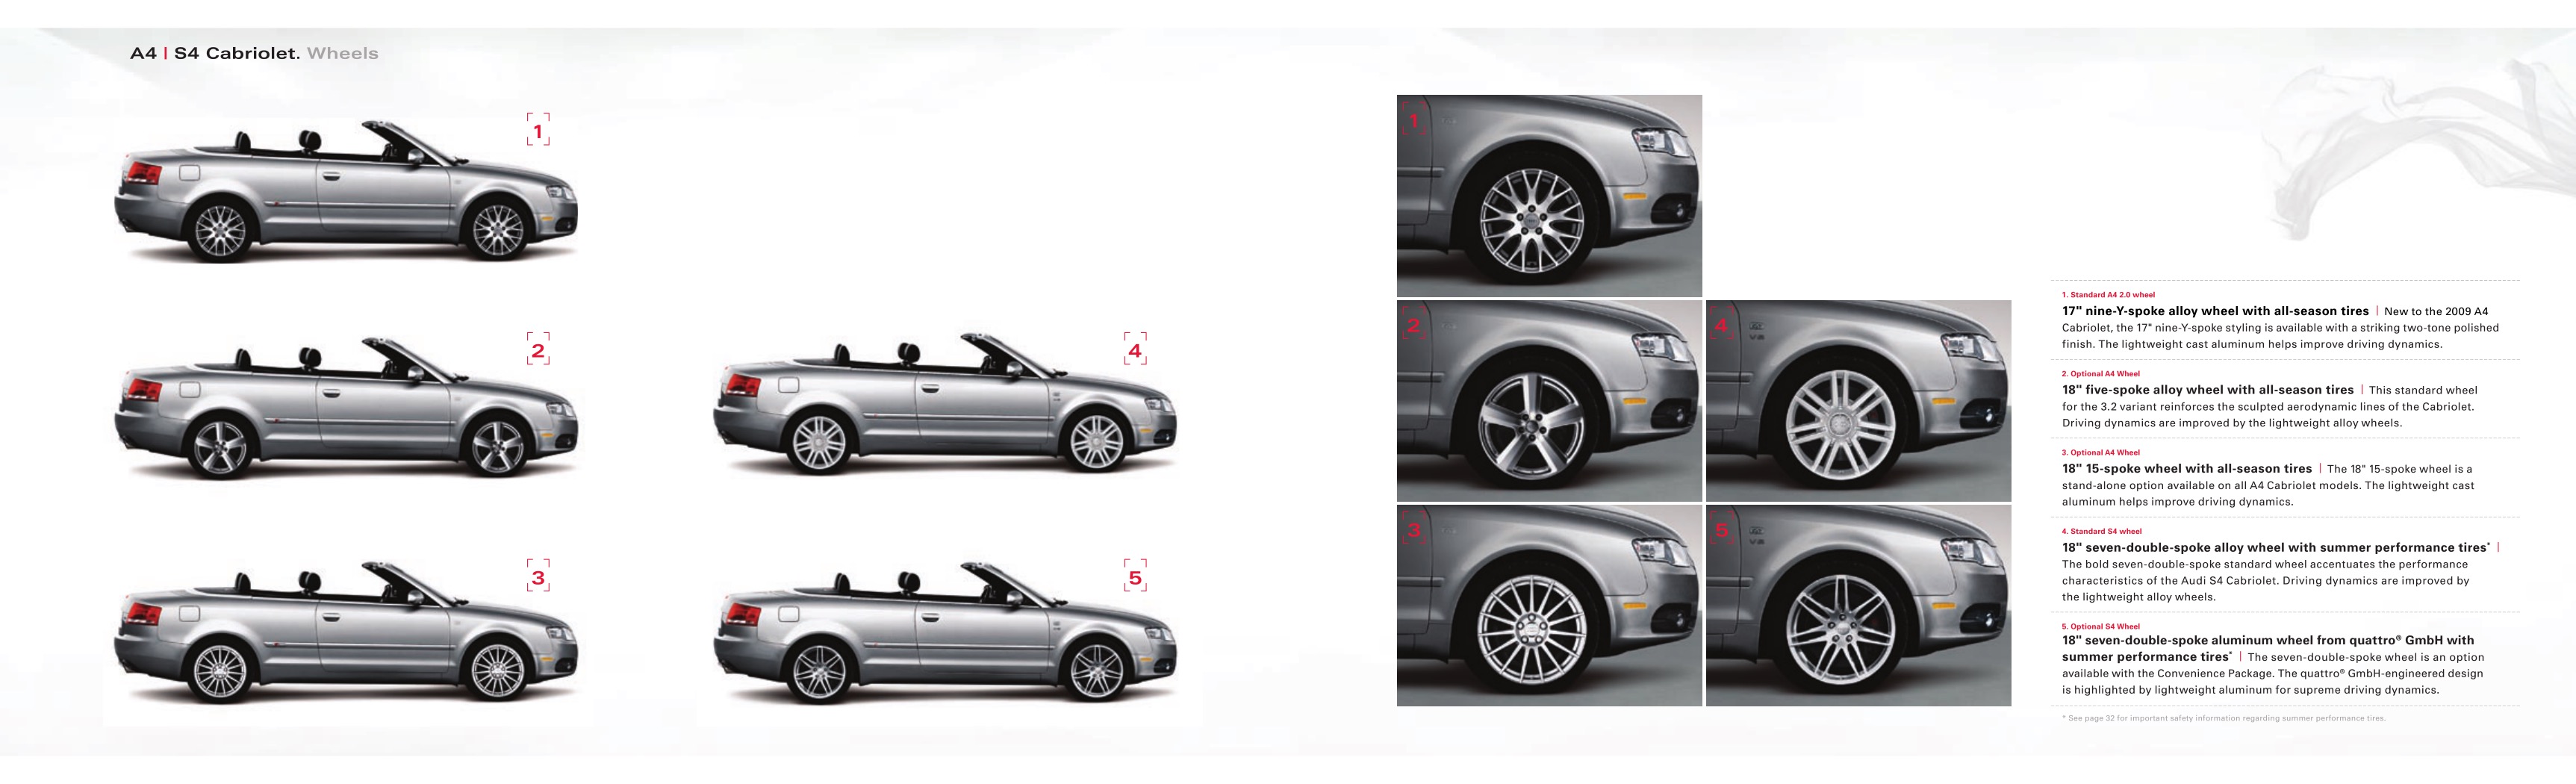 2009 Audi A4 Convertible Brochure Page 1